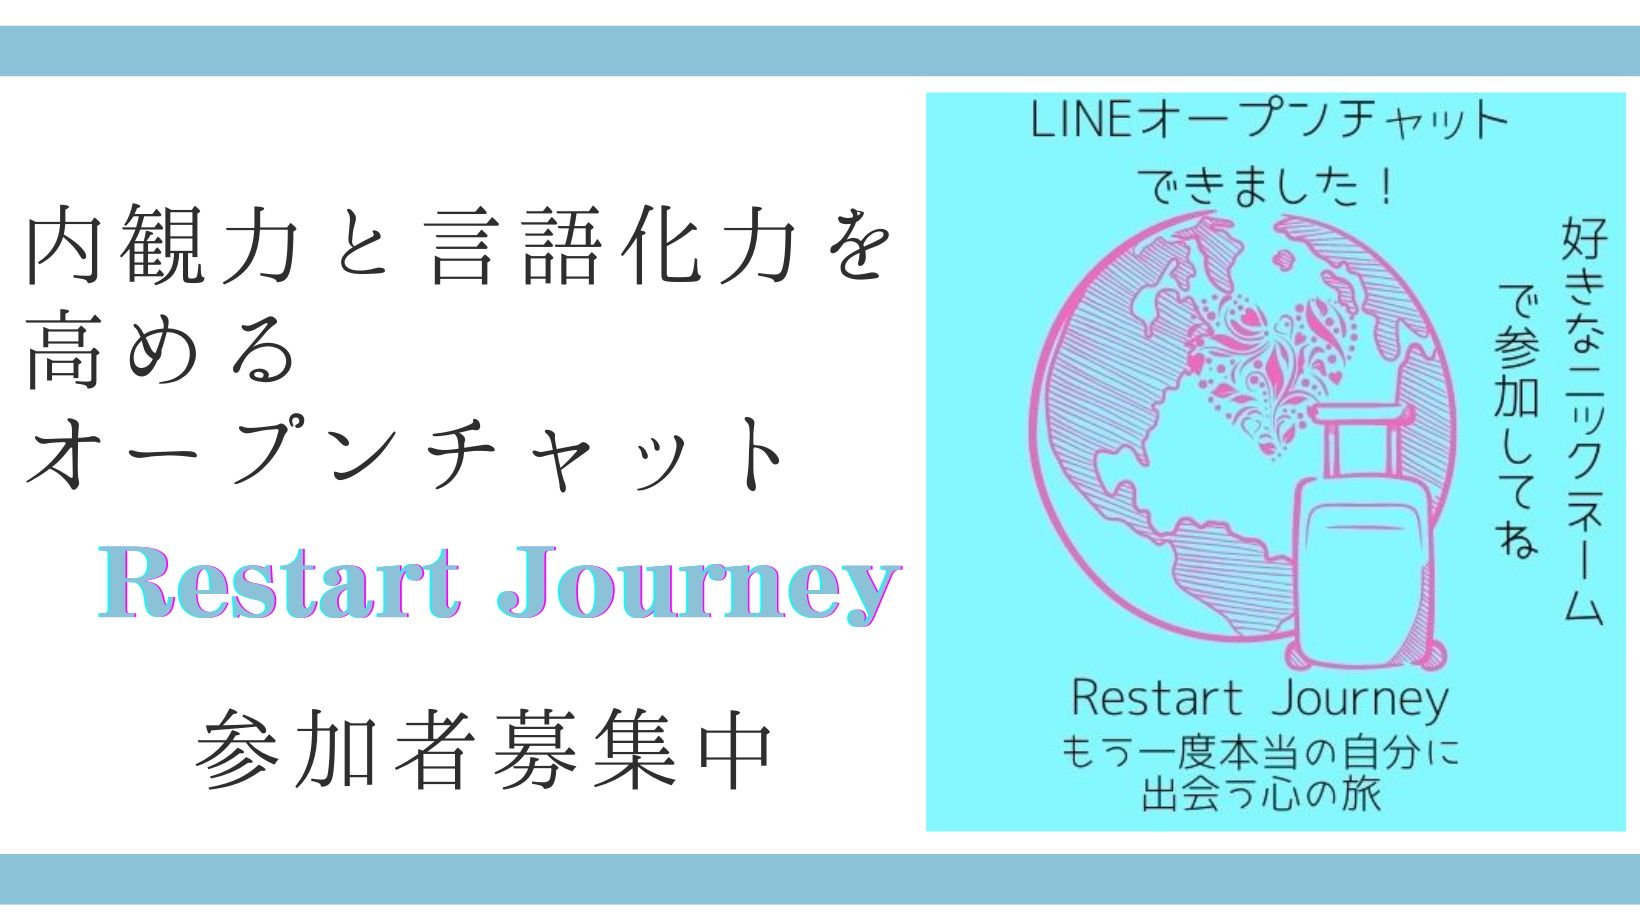 You are currently viewing どんどん自分再発見！オープンチャット「Restart Journey」でアウトプット＆内観力言語化力アップ！中身も公開！